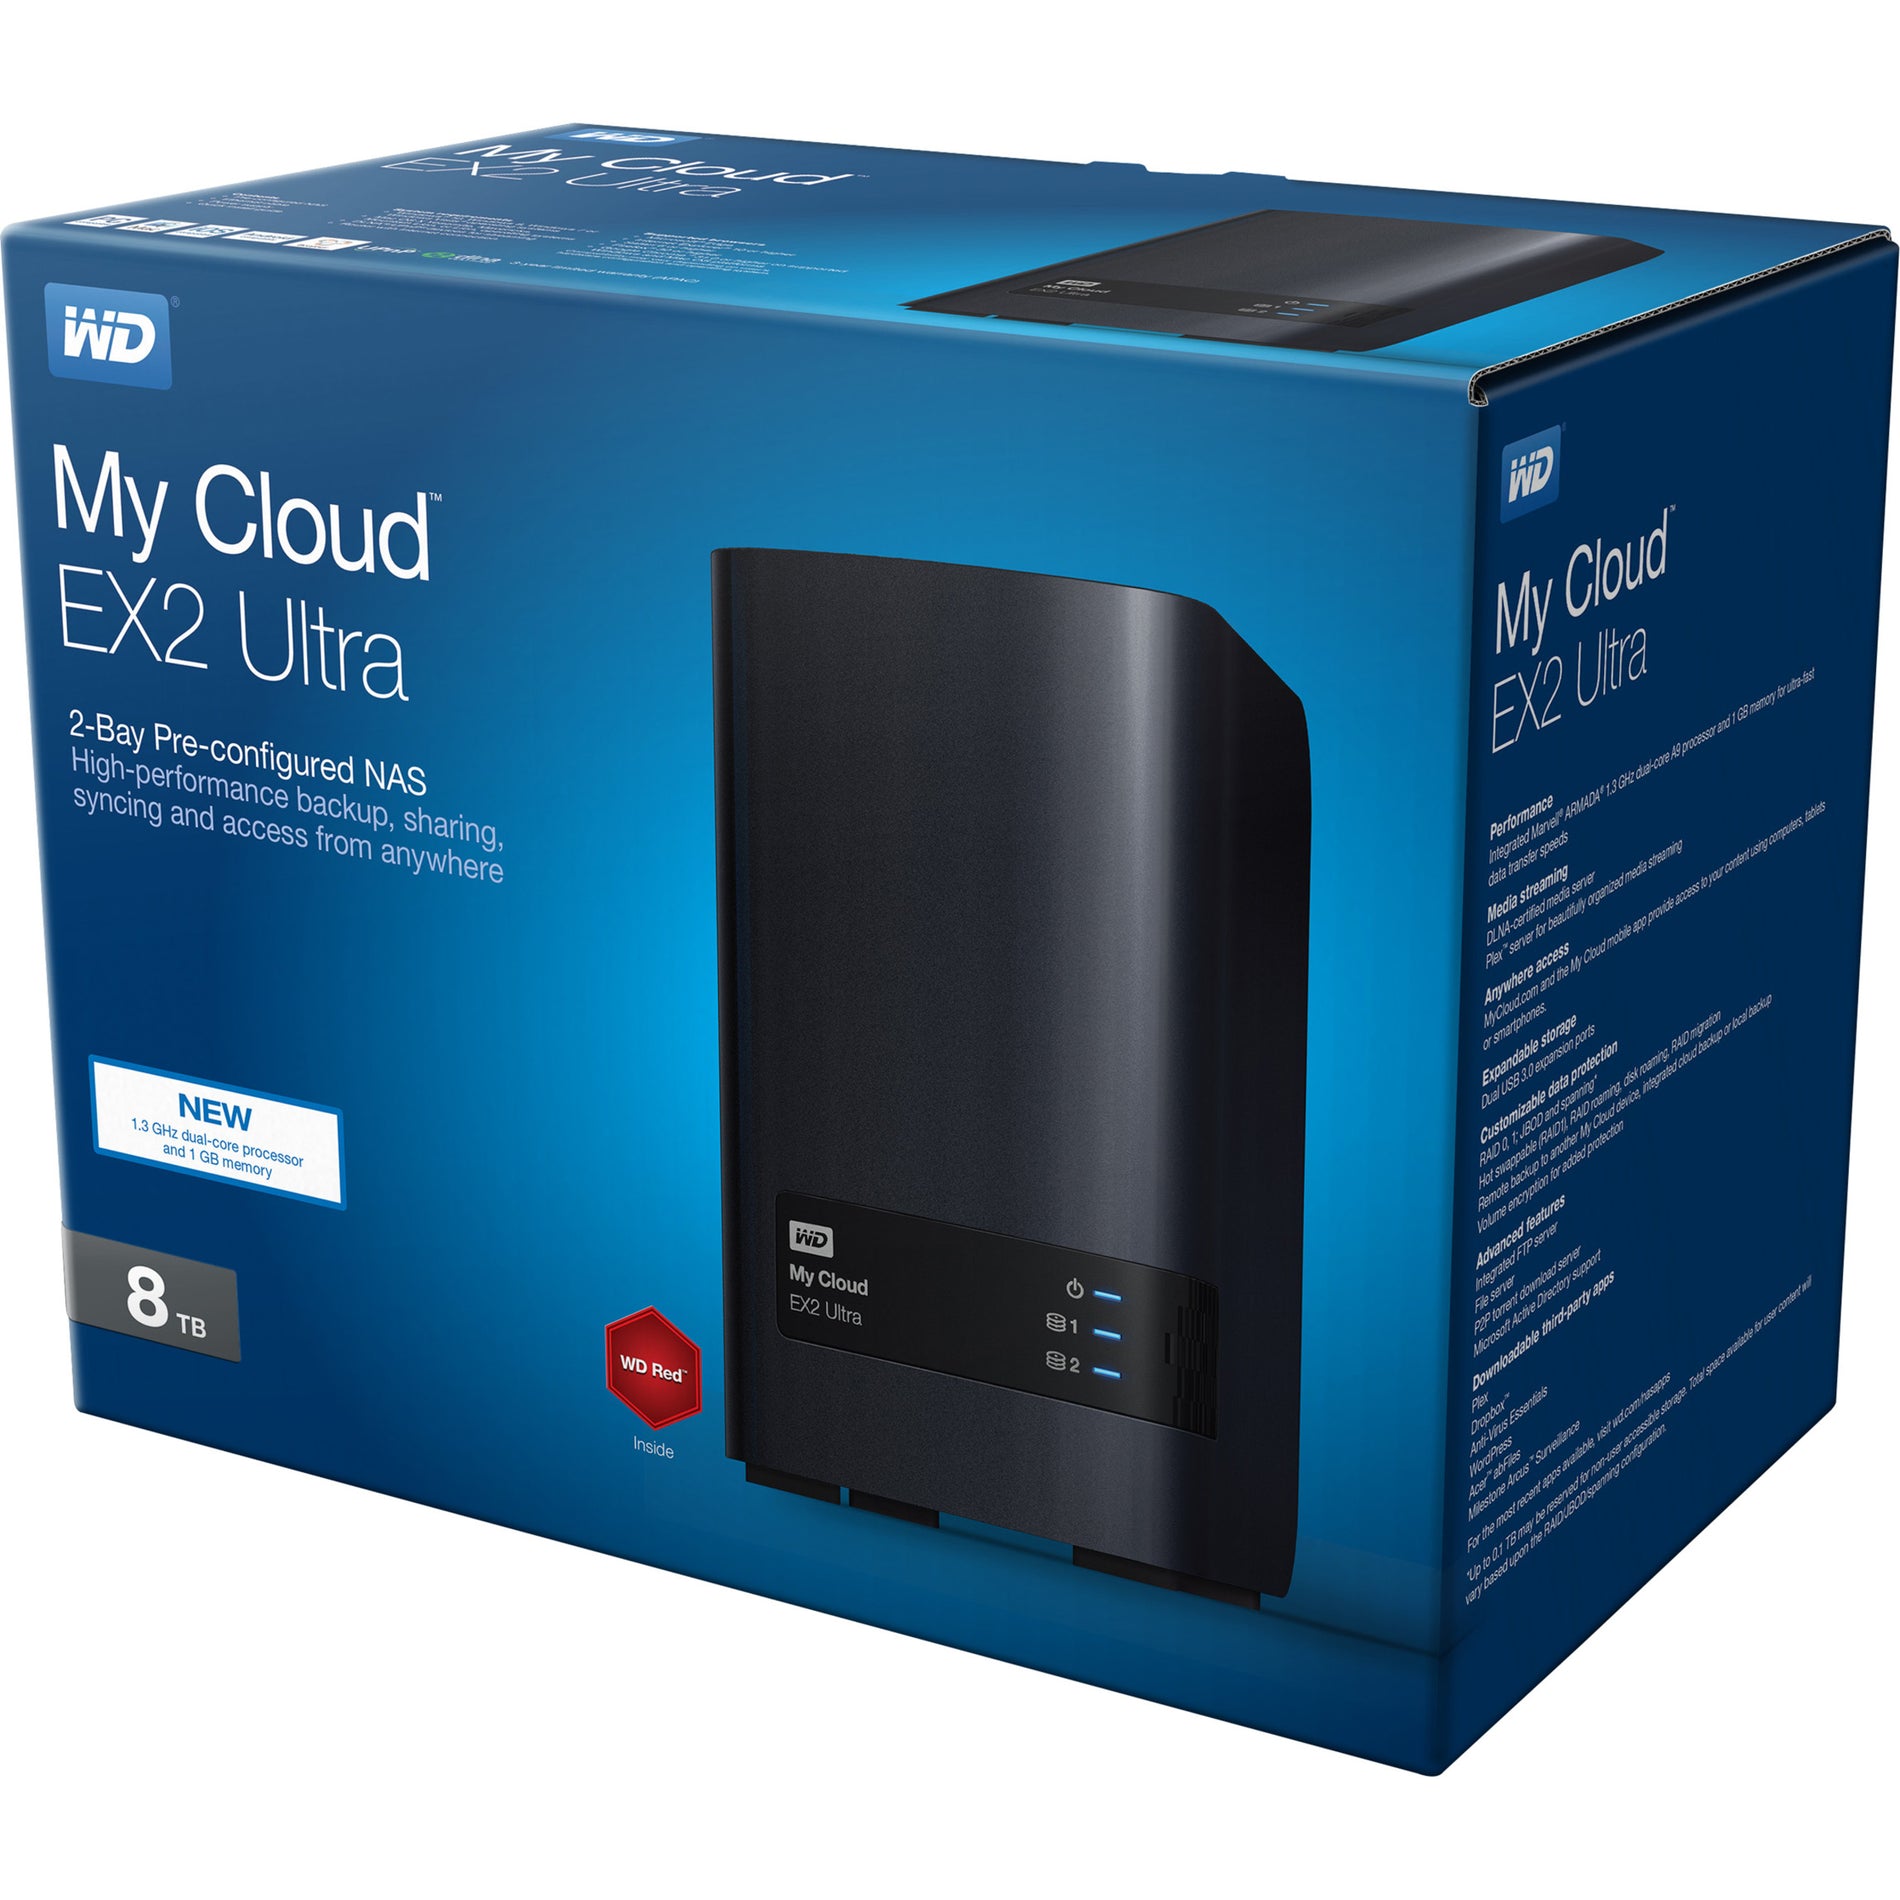 WD WDBVBZ0080JCH-NESN My Cloud EX2 Ultra Network Attached Storage - NAS, 8TB Total Hard Drive Capacity Installed